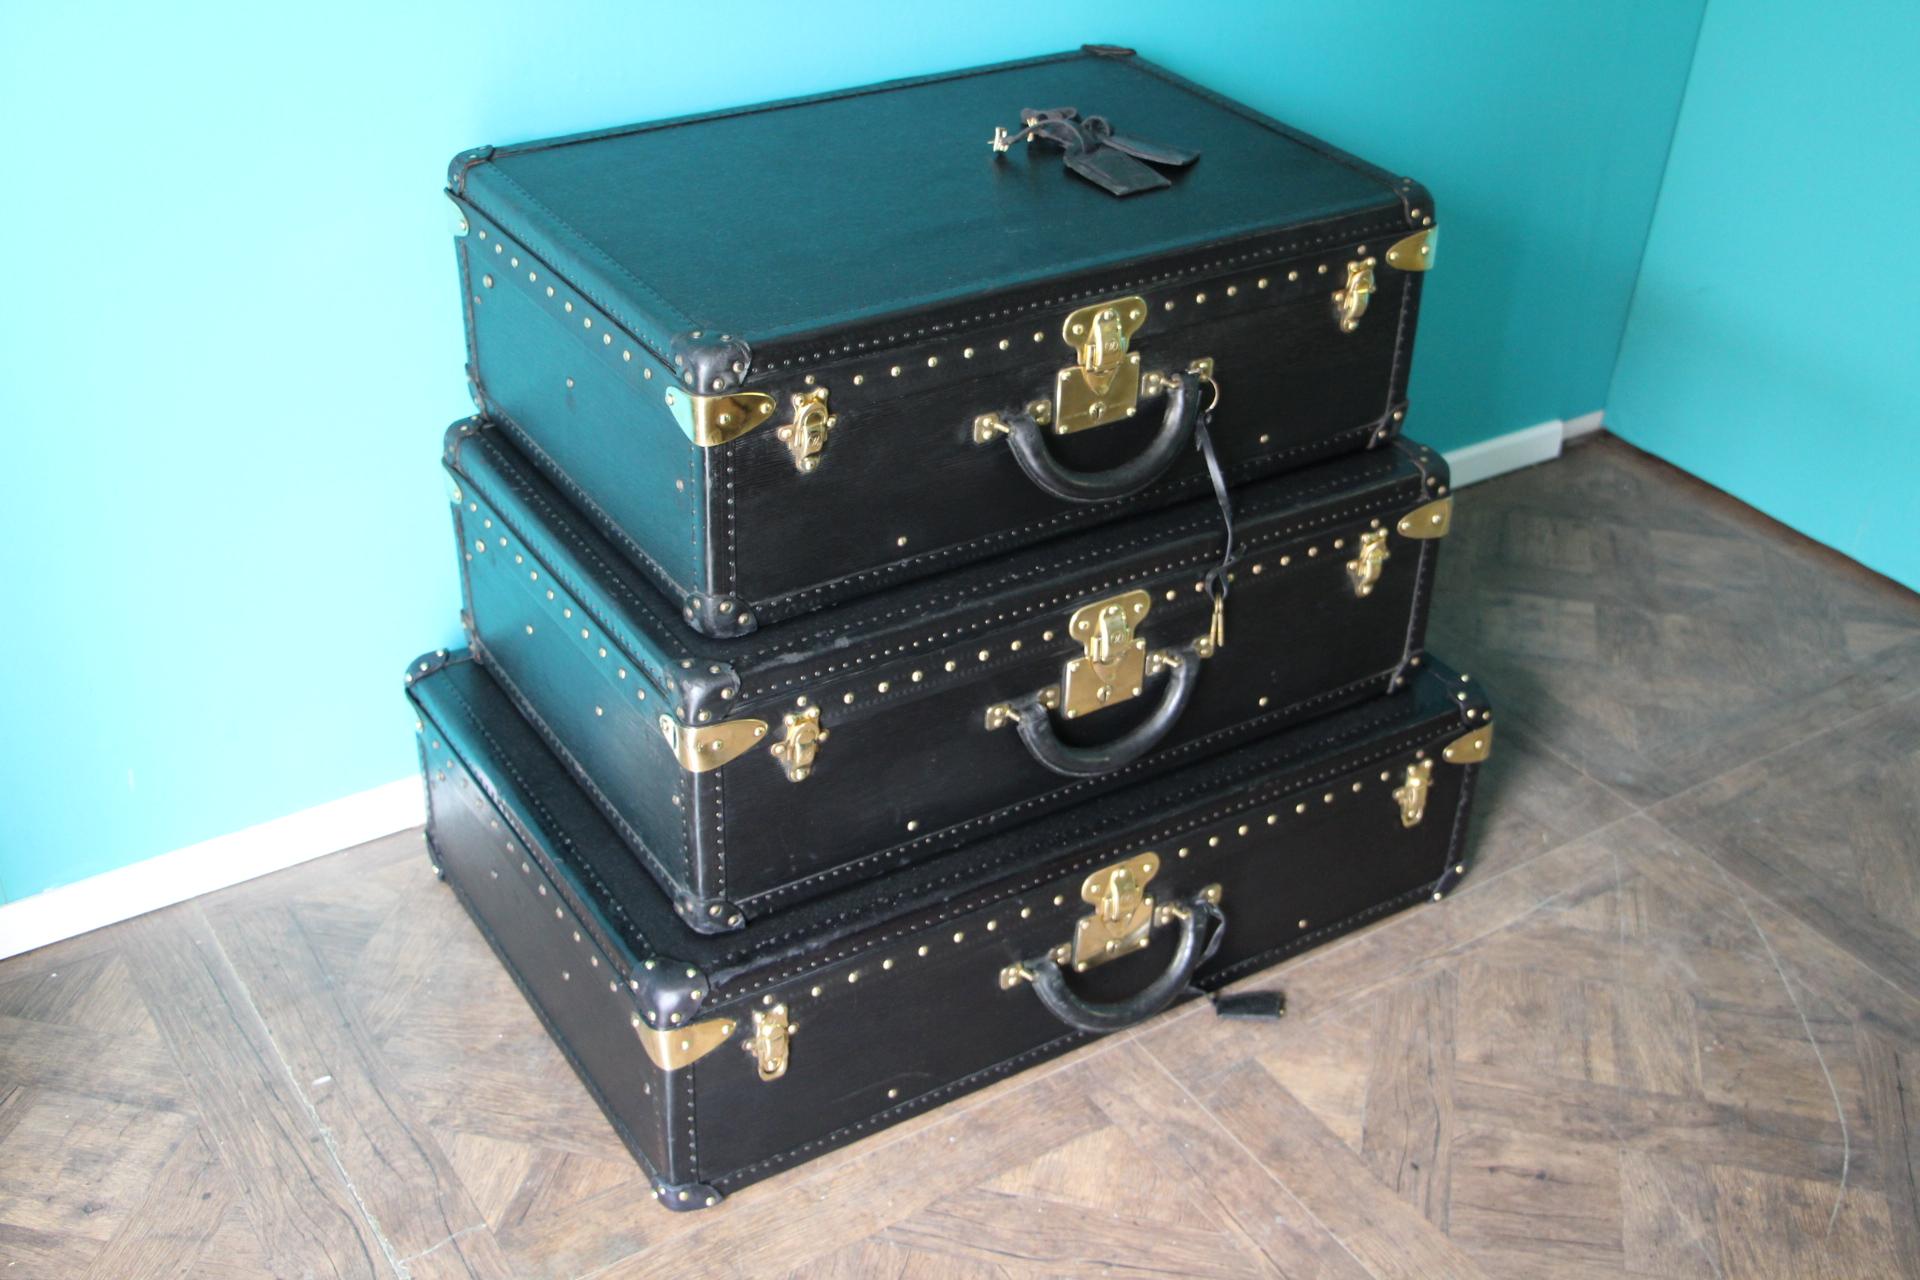 This top of the range stack of 3 black leather Alzer rigid suitcases features black leather trim, all solid brass LV stamped lock, clasps and studs. Large leather handle.
1 matching black epic leather name holder by piece.
Their interiors are in